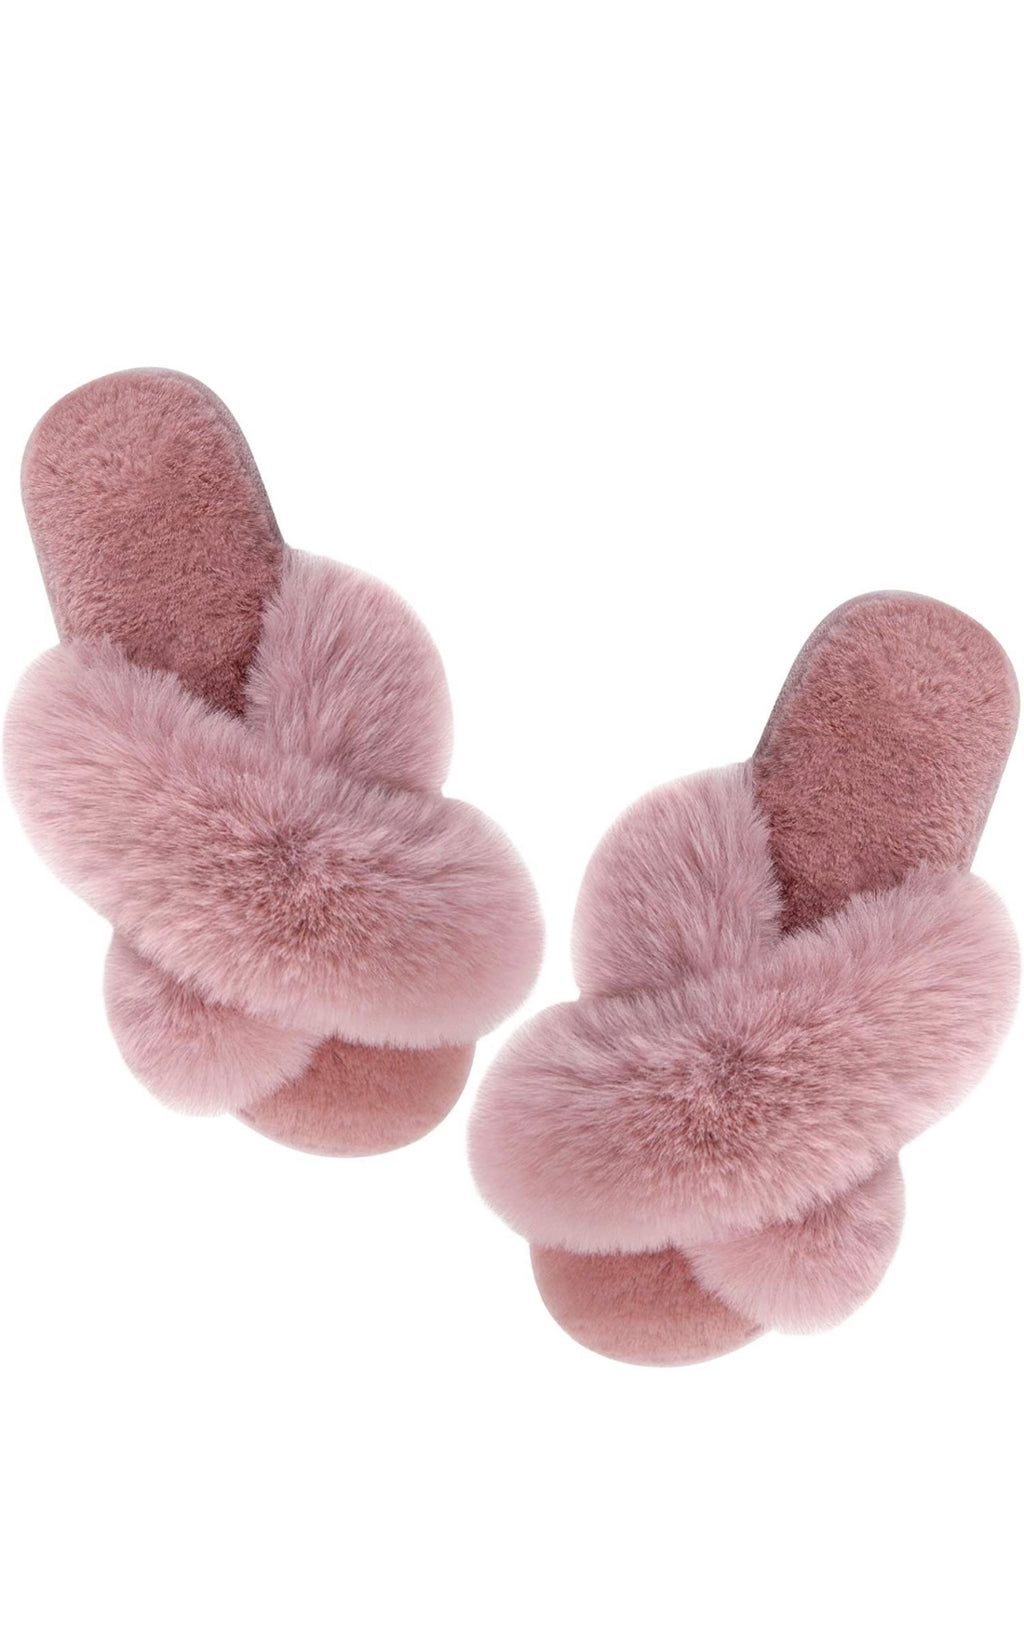 Classic Pink Peluche Slippers 💕